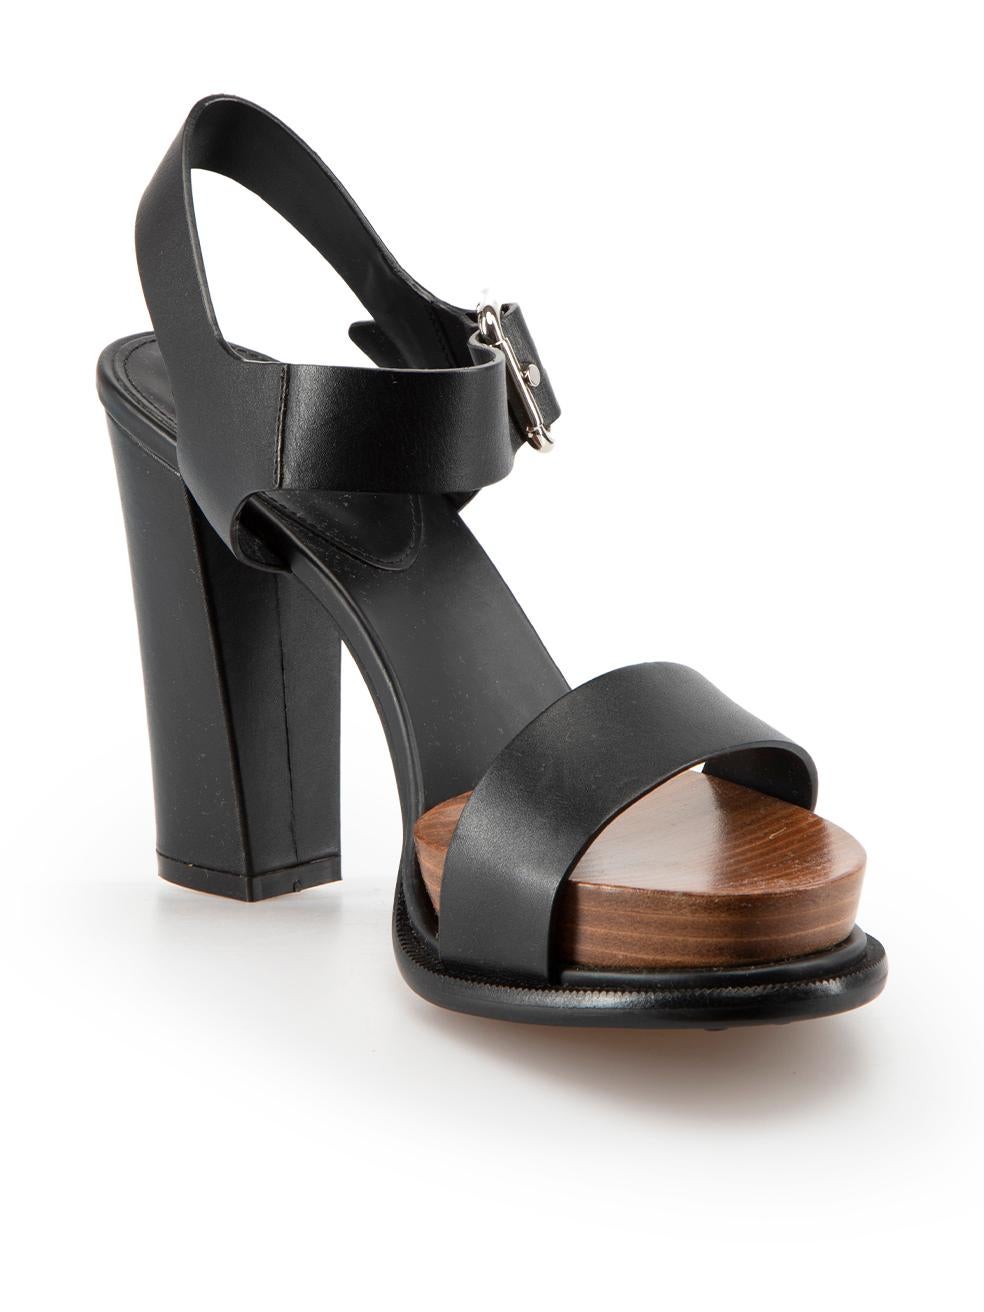 CONDITION is Never Worn. No visible wear to sandals is evident, however the right shoe heel has a small indent to the leather due to poor storage on this used Tod's designer resale item.
  
Details
Black
Leather
Heeled sandals
Open toe
Wooden